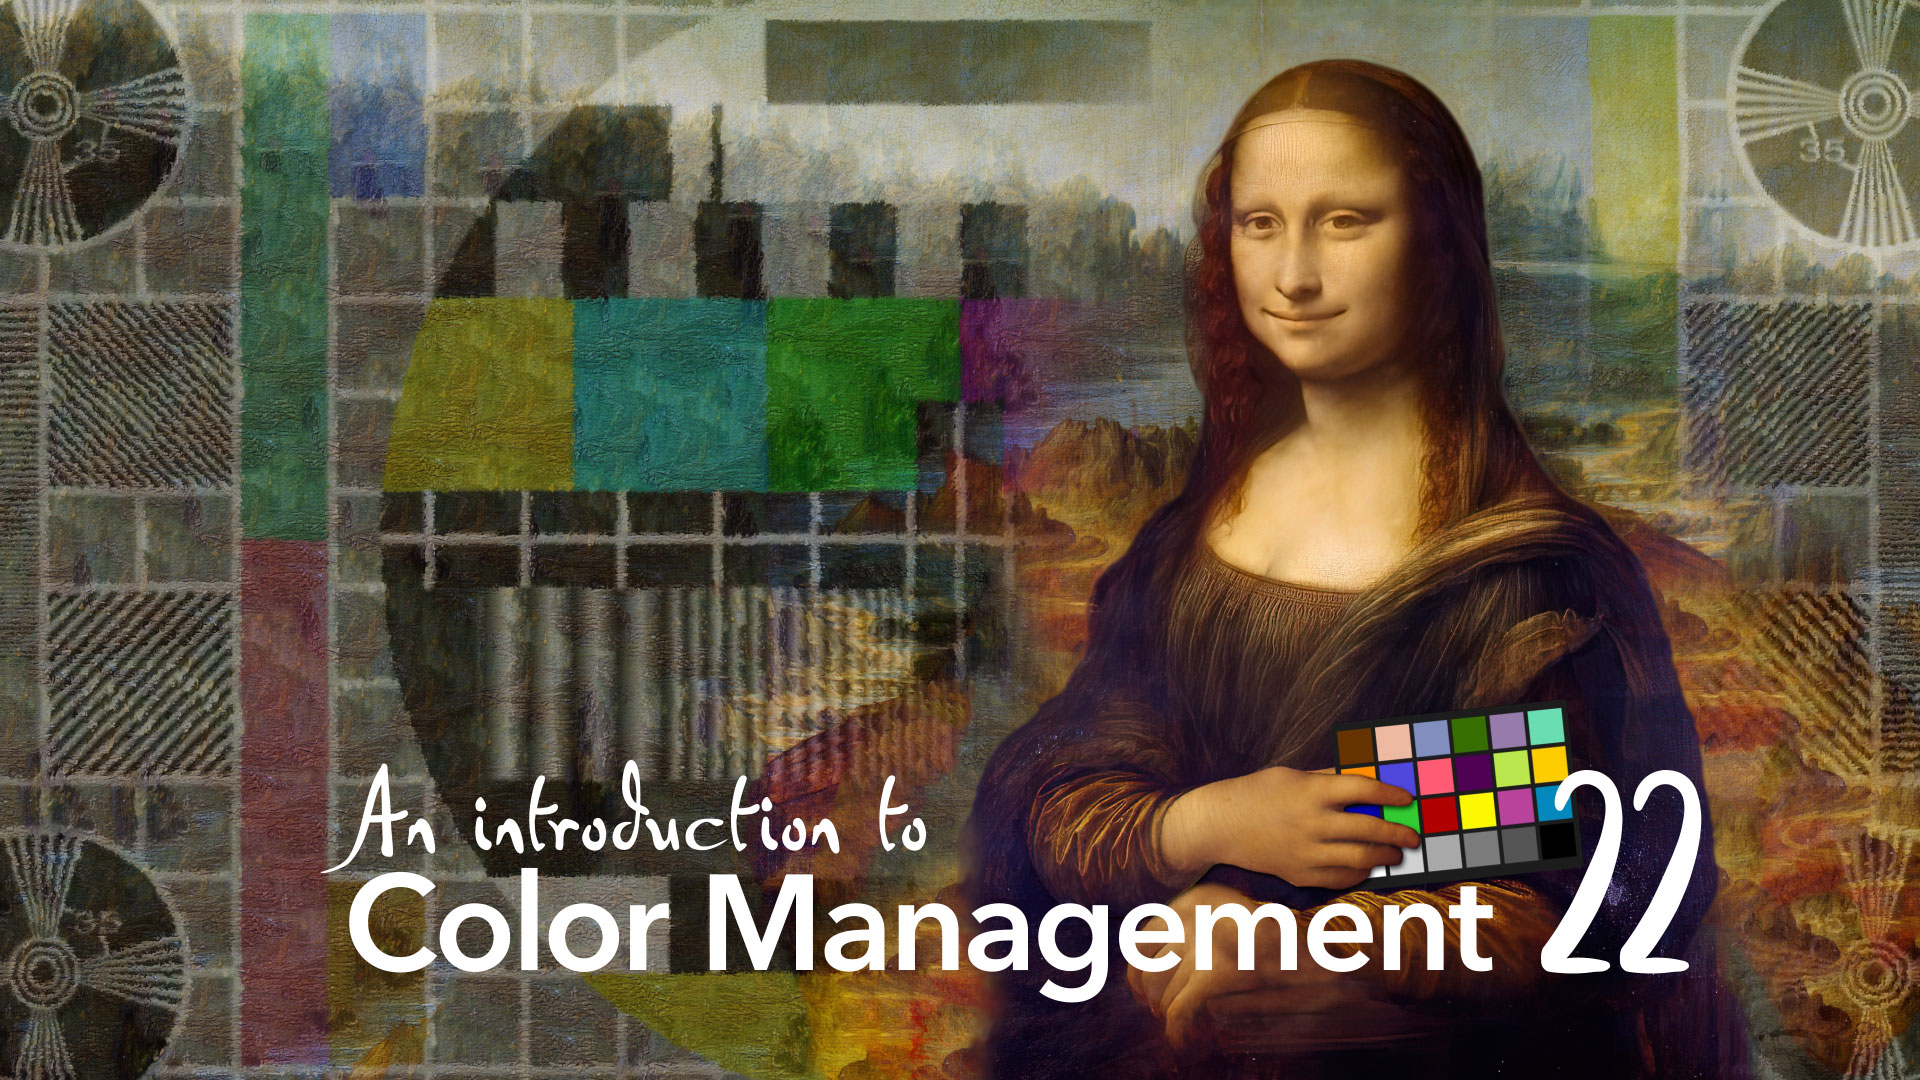 Color Management Part 22: Introducing Tone Mapping 6